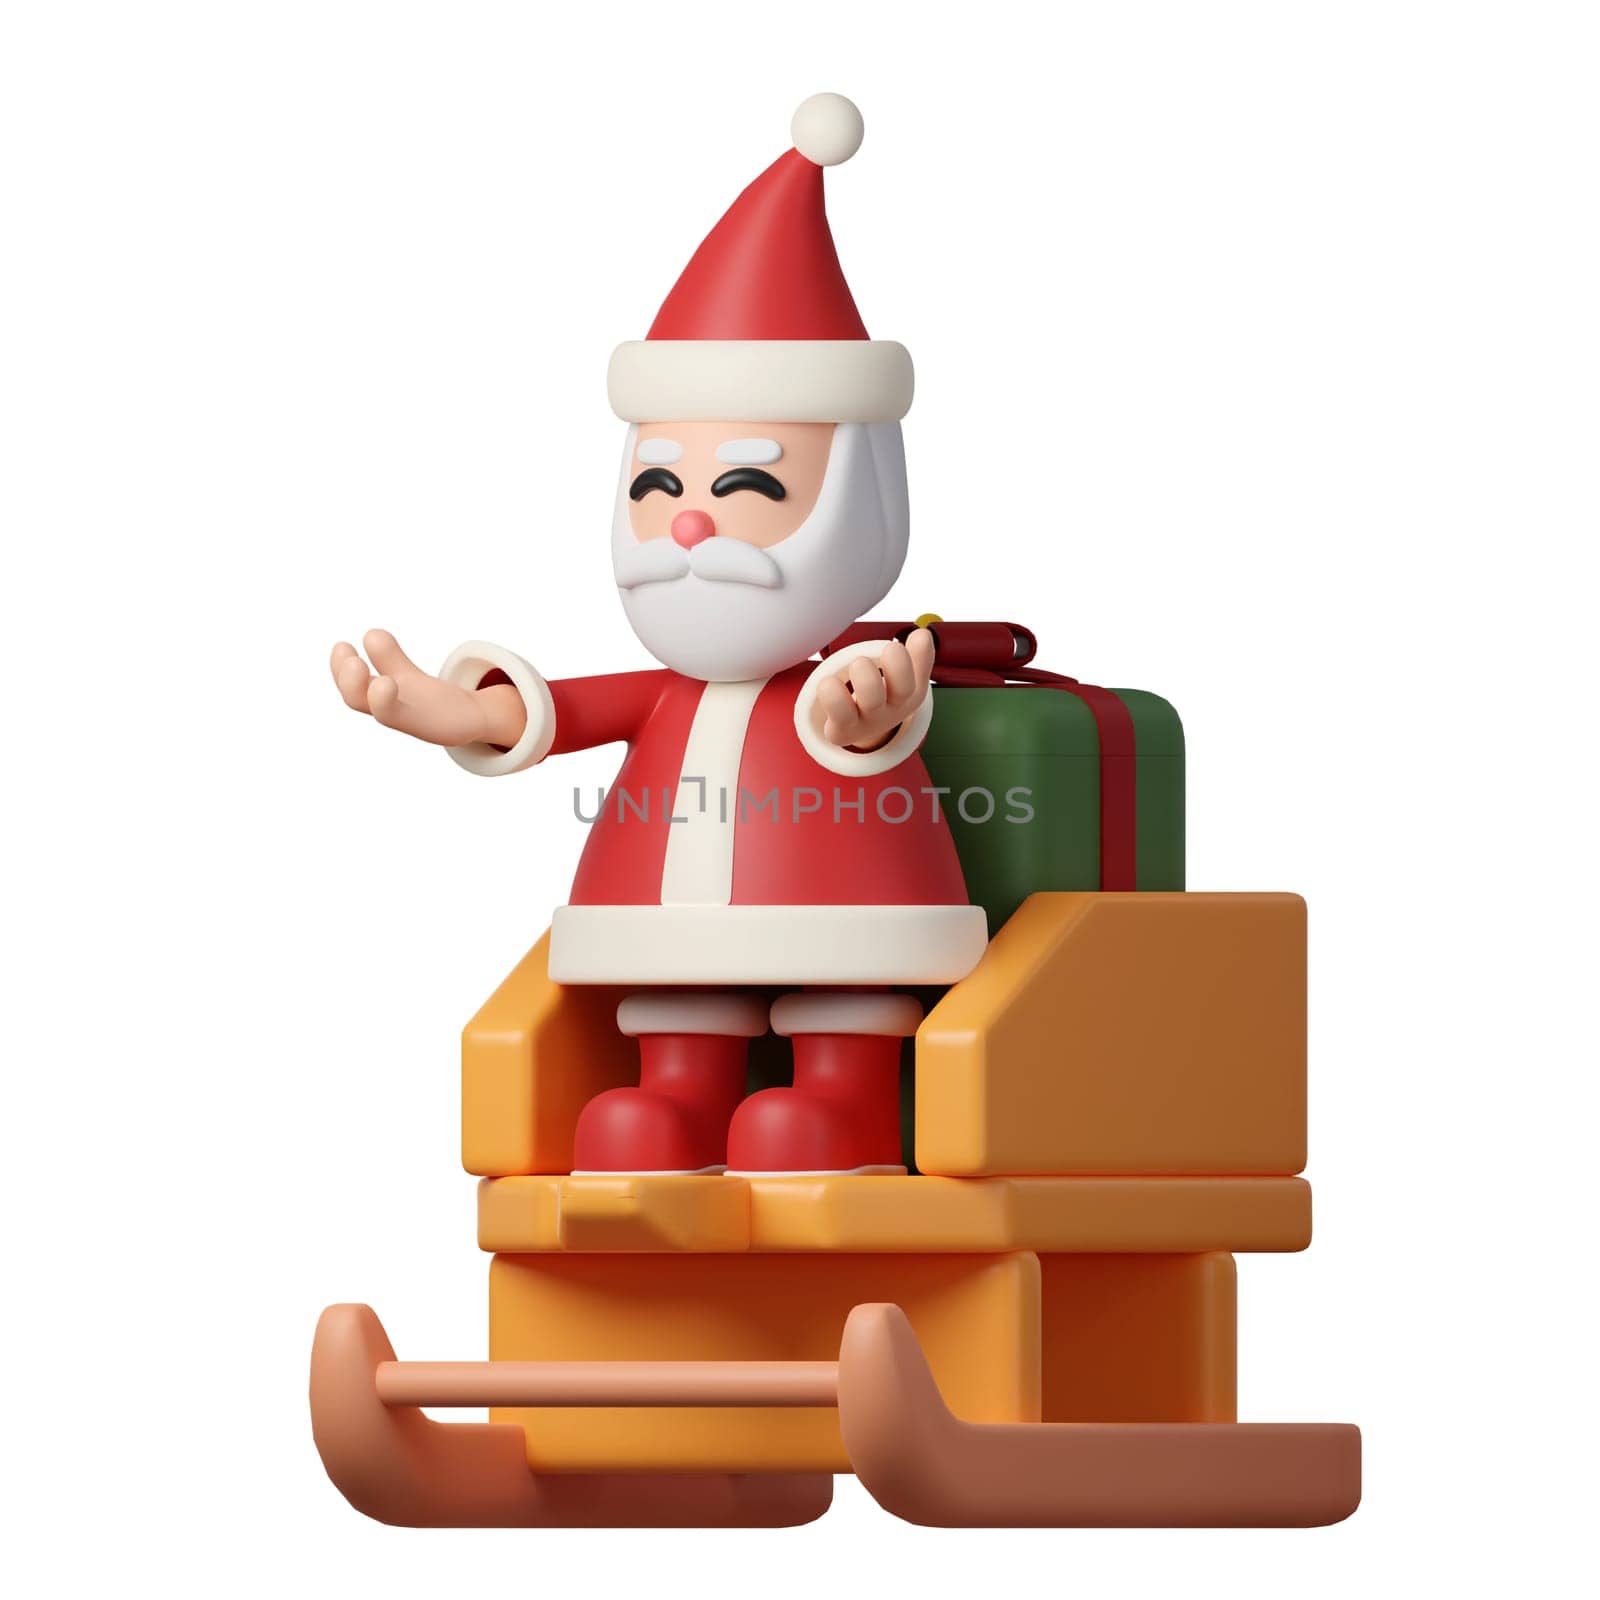 3d Christmas santaclaus on sleigh icon. minimal decorative festive conical shape tree. New Year's holiday decor. 3d design element In cartoon style. Icon isolated on white background. 3d illustration by meepiangraphic